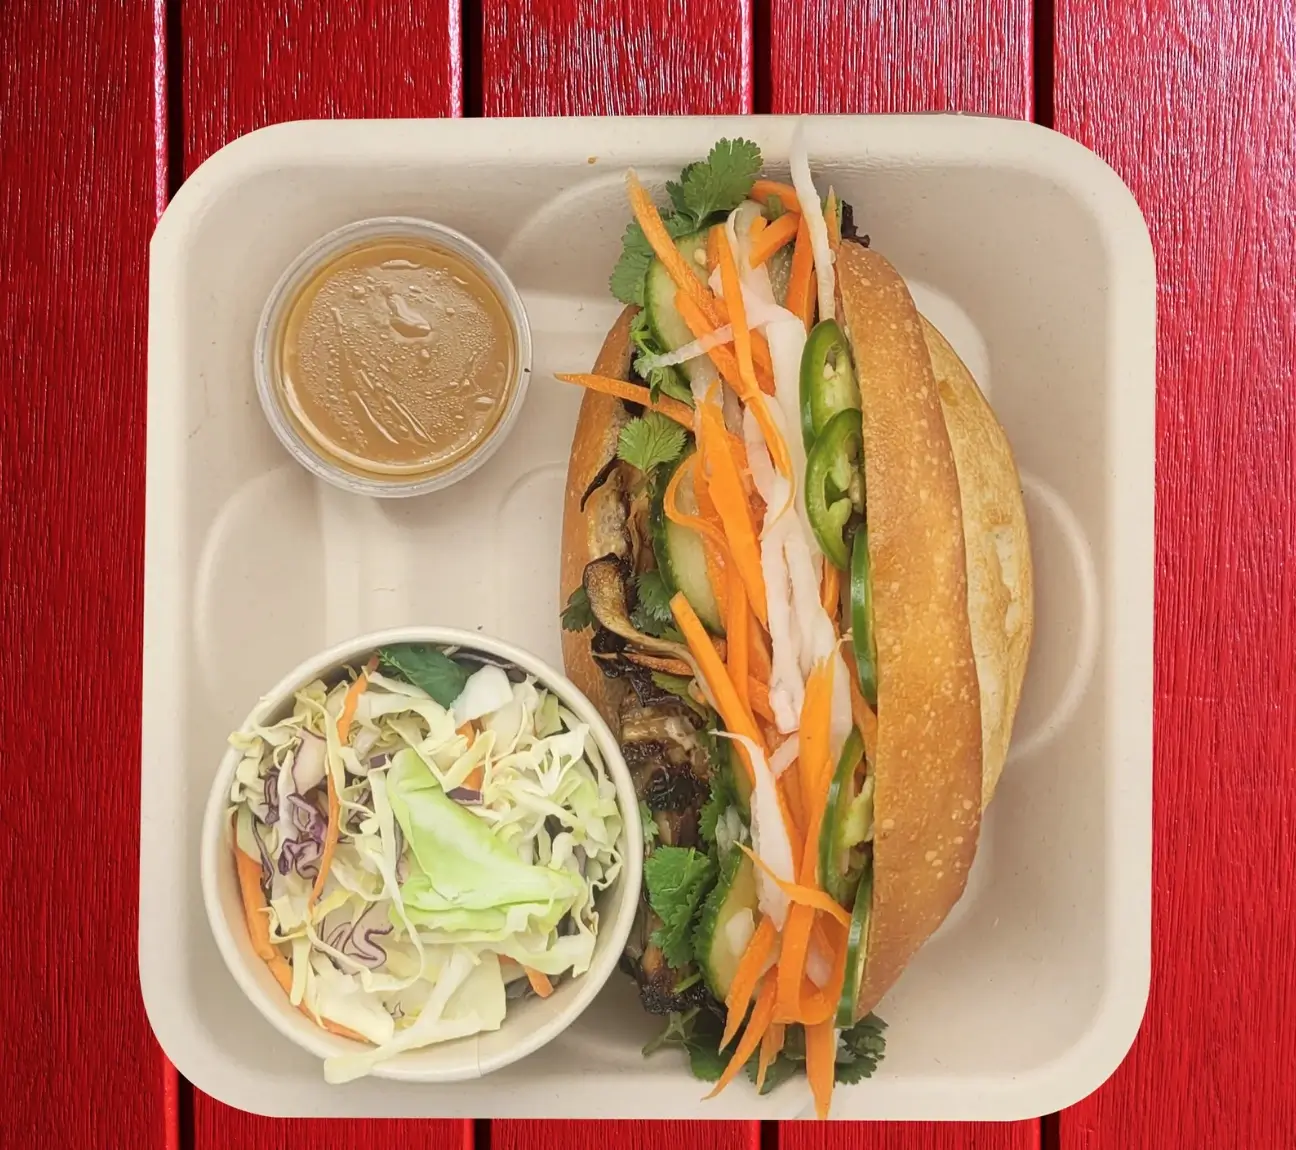 A Vietnamese-sub sandwich full of vegetables with a side coleslaw and sauce in a to-go container on a red background